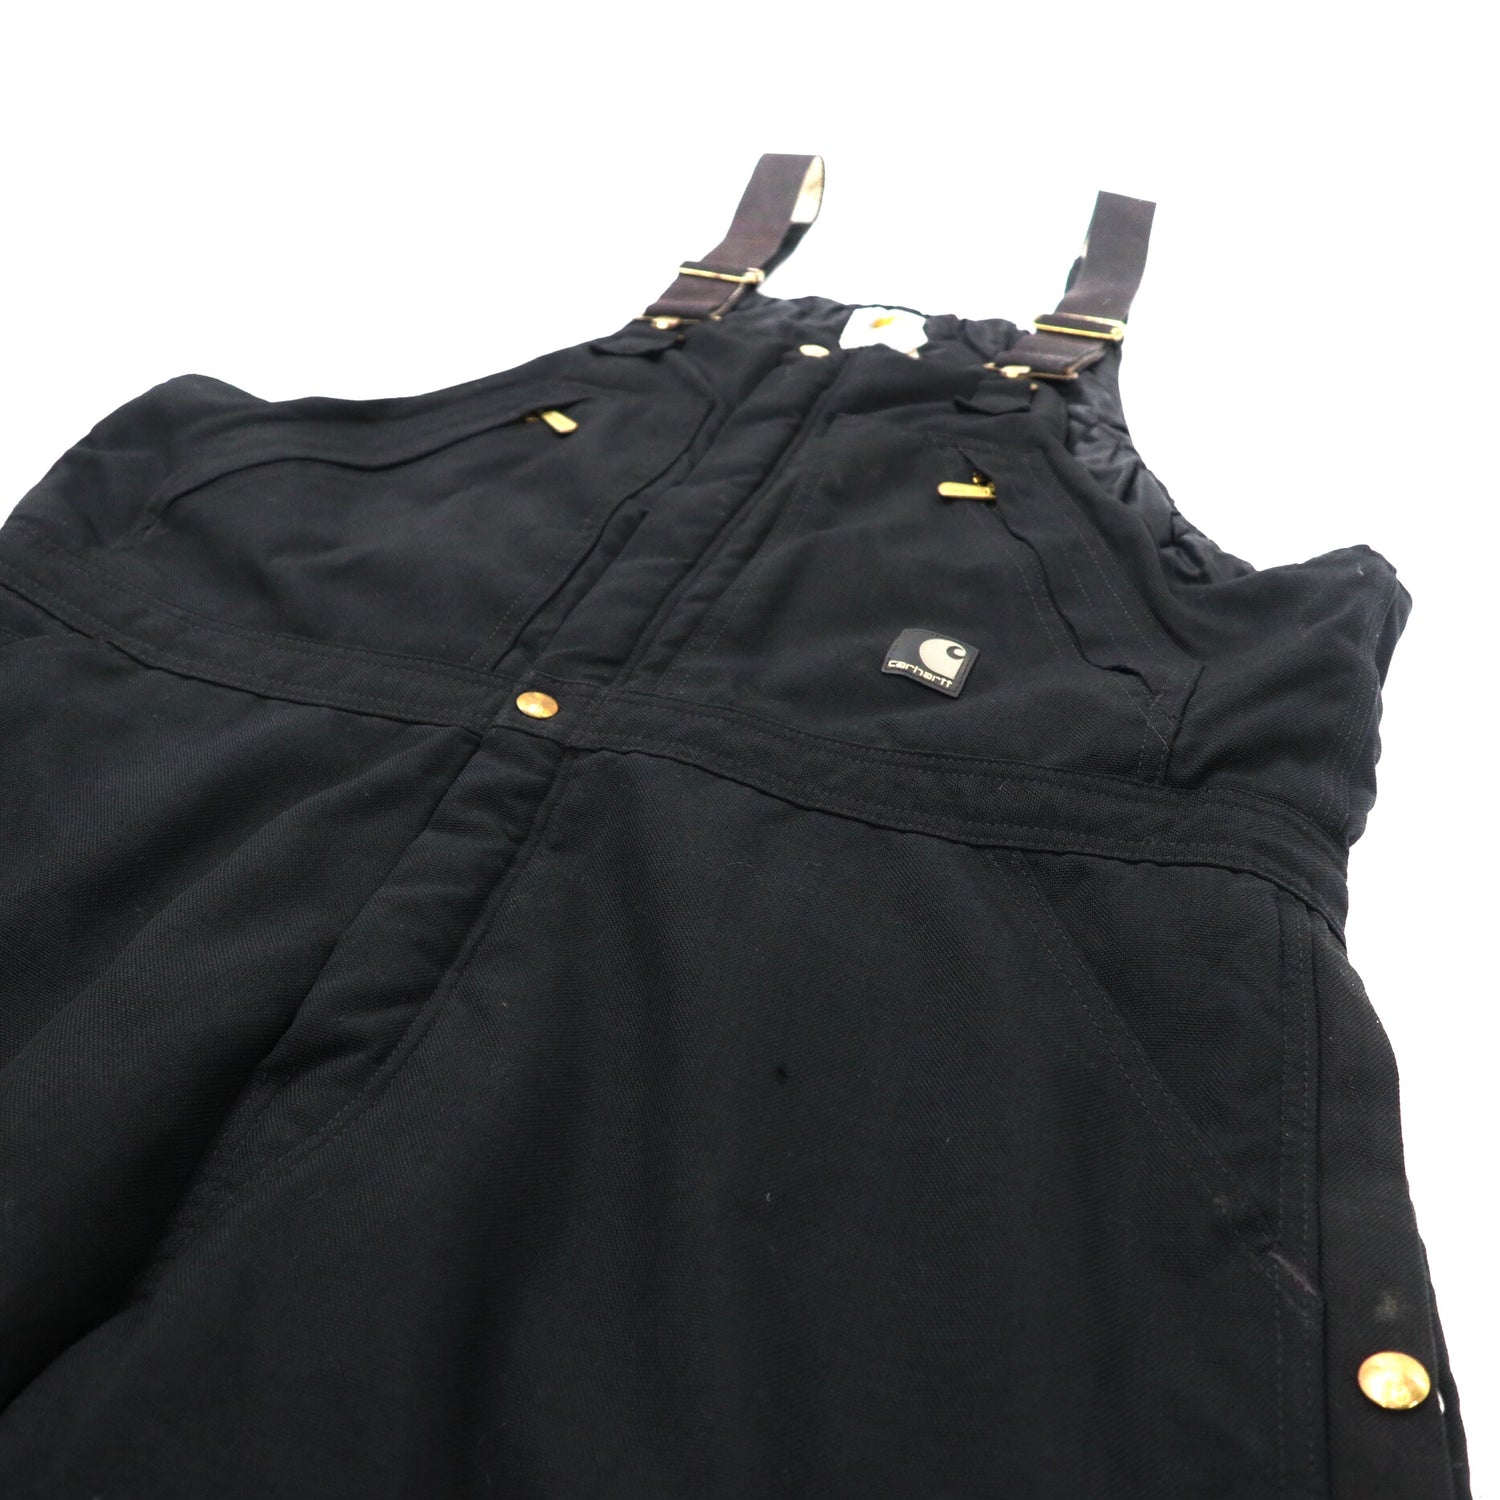 CARHARTT Double Ney Overall 38 Black 90s Nylon Quilting Liner USA 